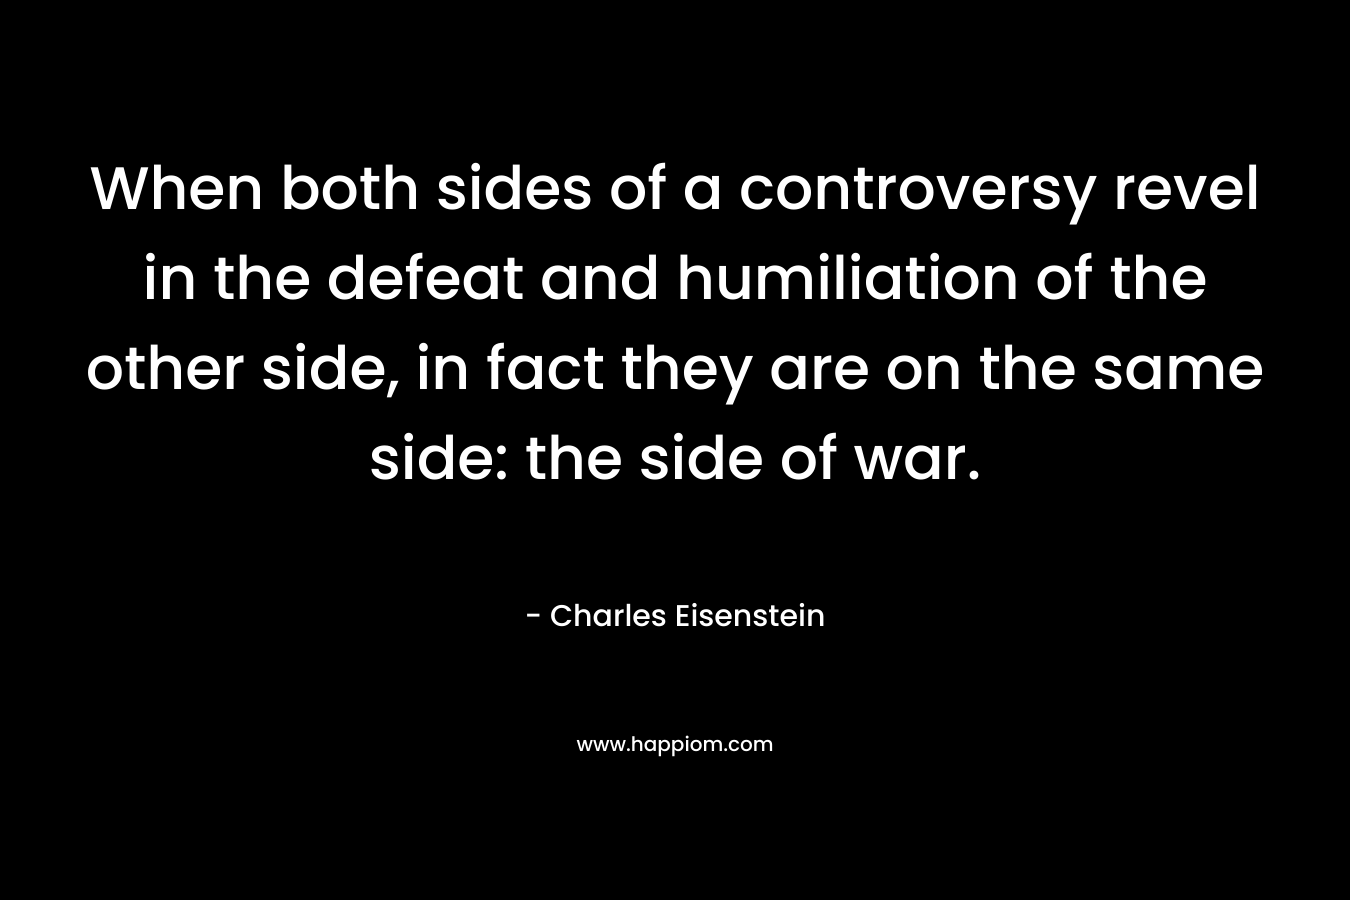 When both sides of a controversy revel in the defeat and humiliation of the other side, in fact they are on the same side: the side of war.